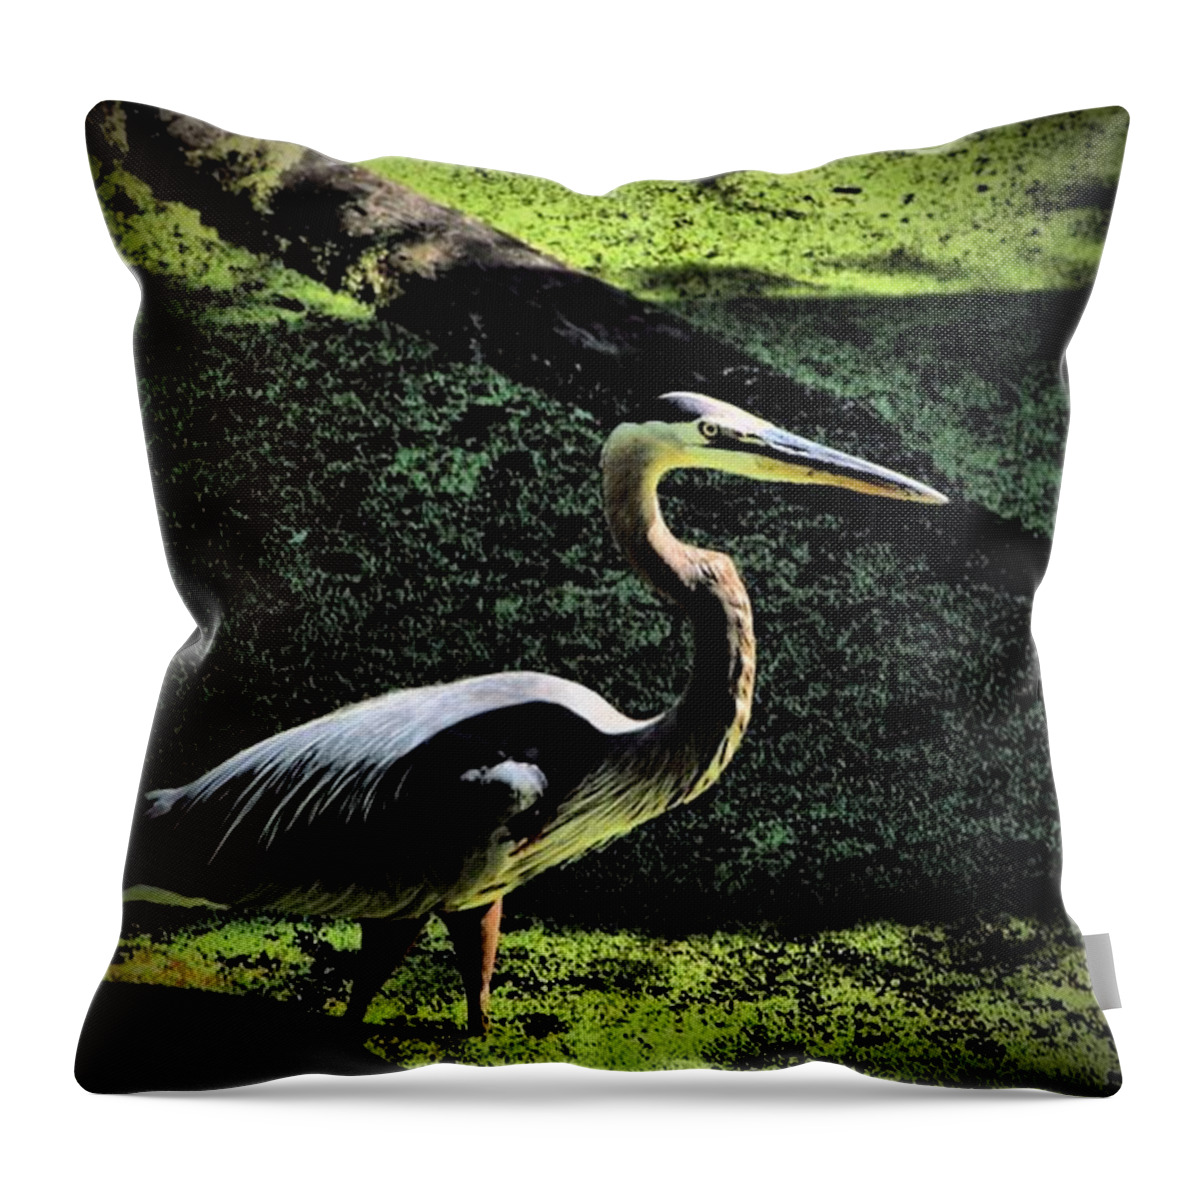 Animals Throw Pillow featuring the photograph Here Fishy Fishy by Robert McCubbin